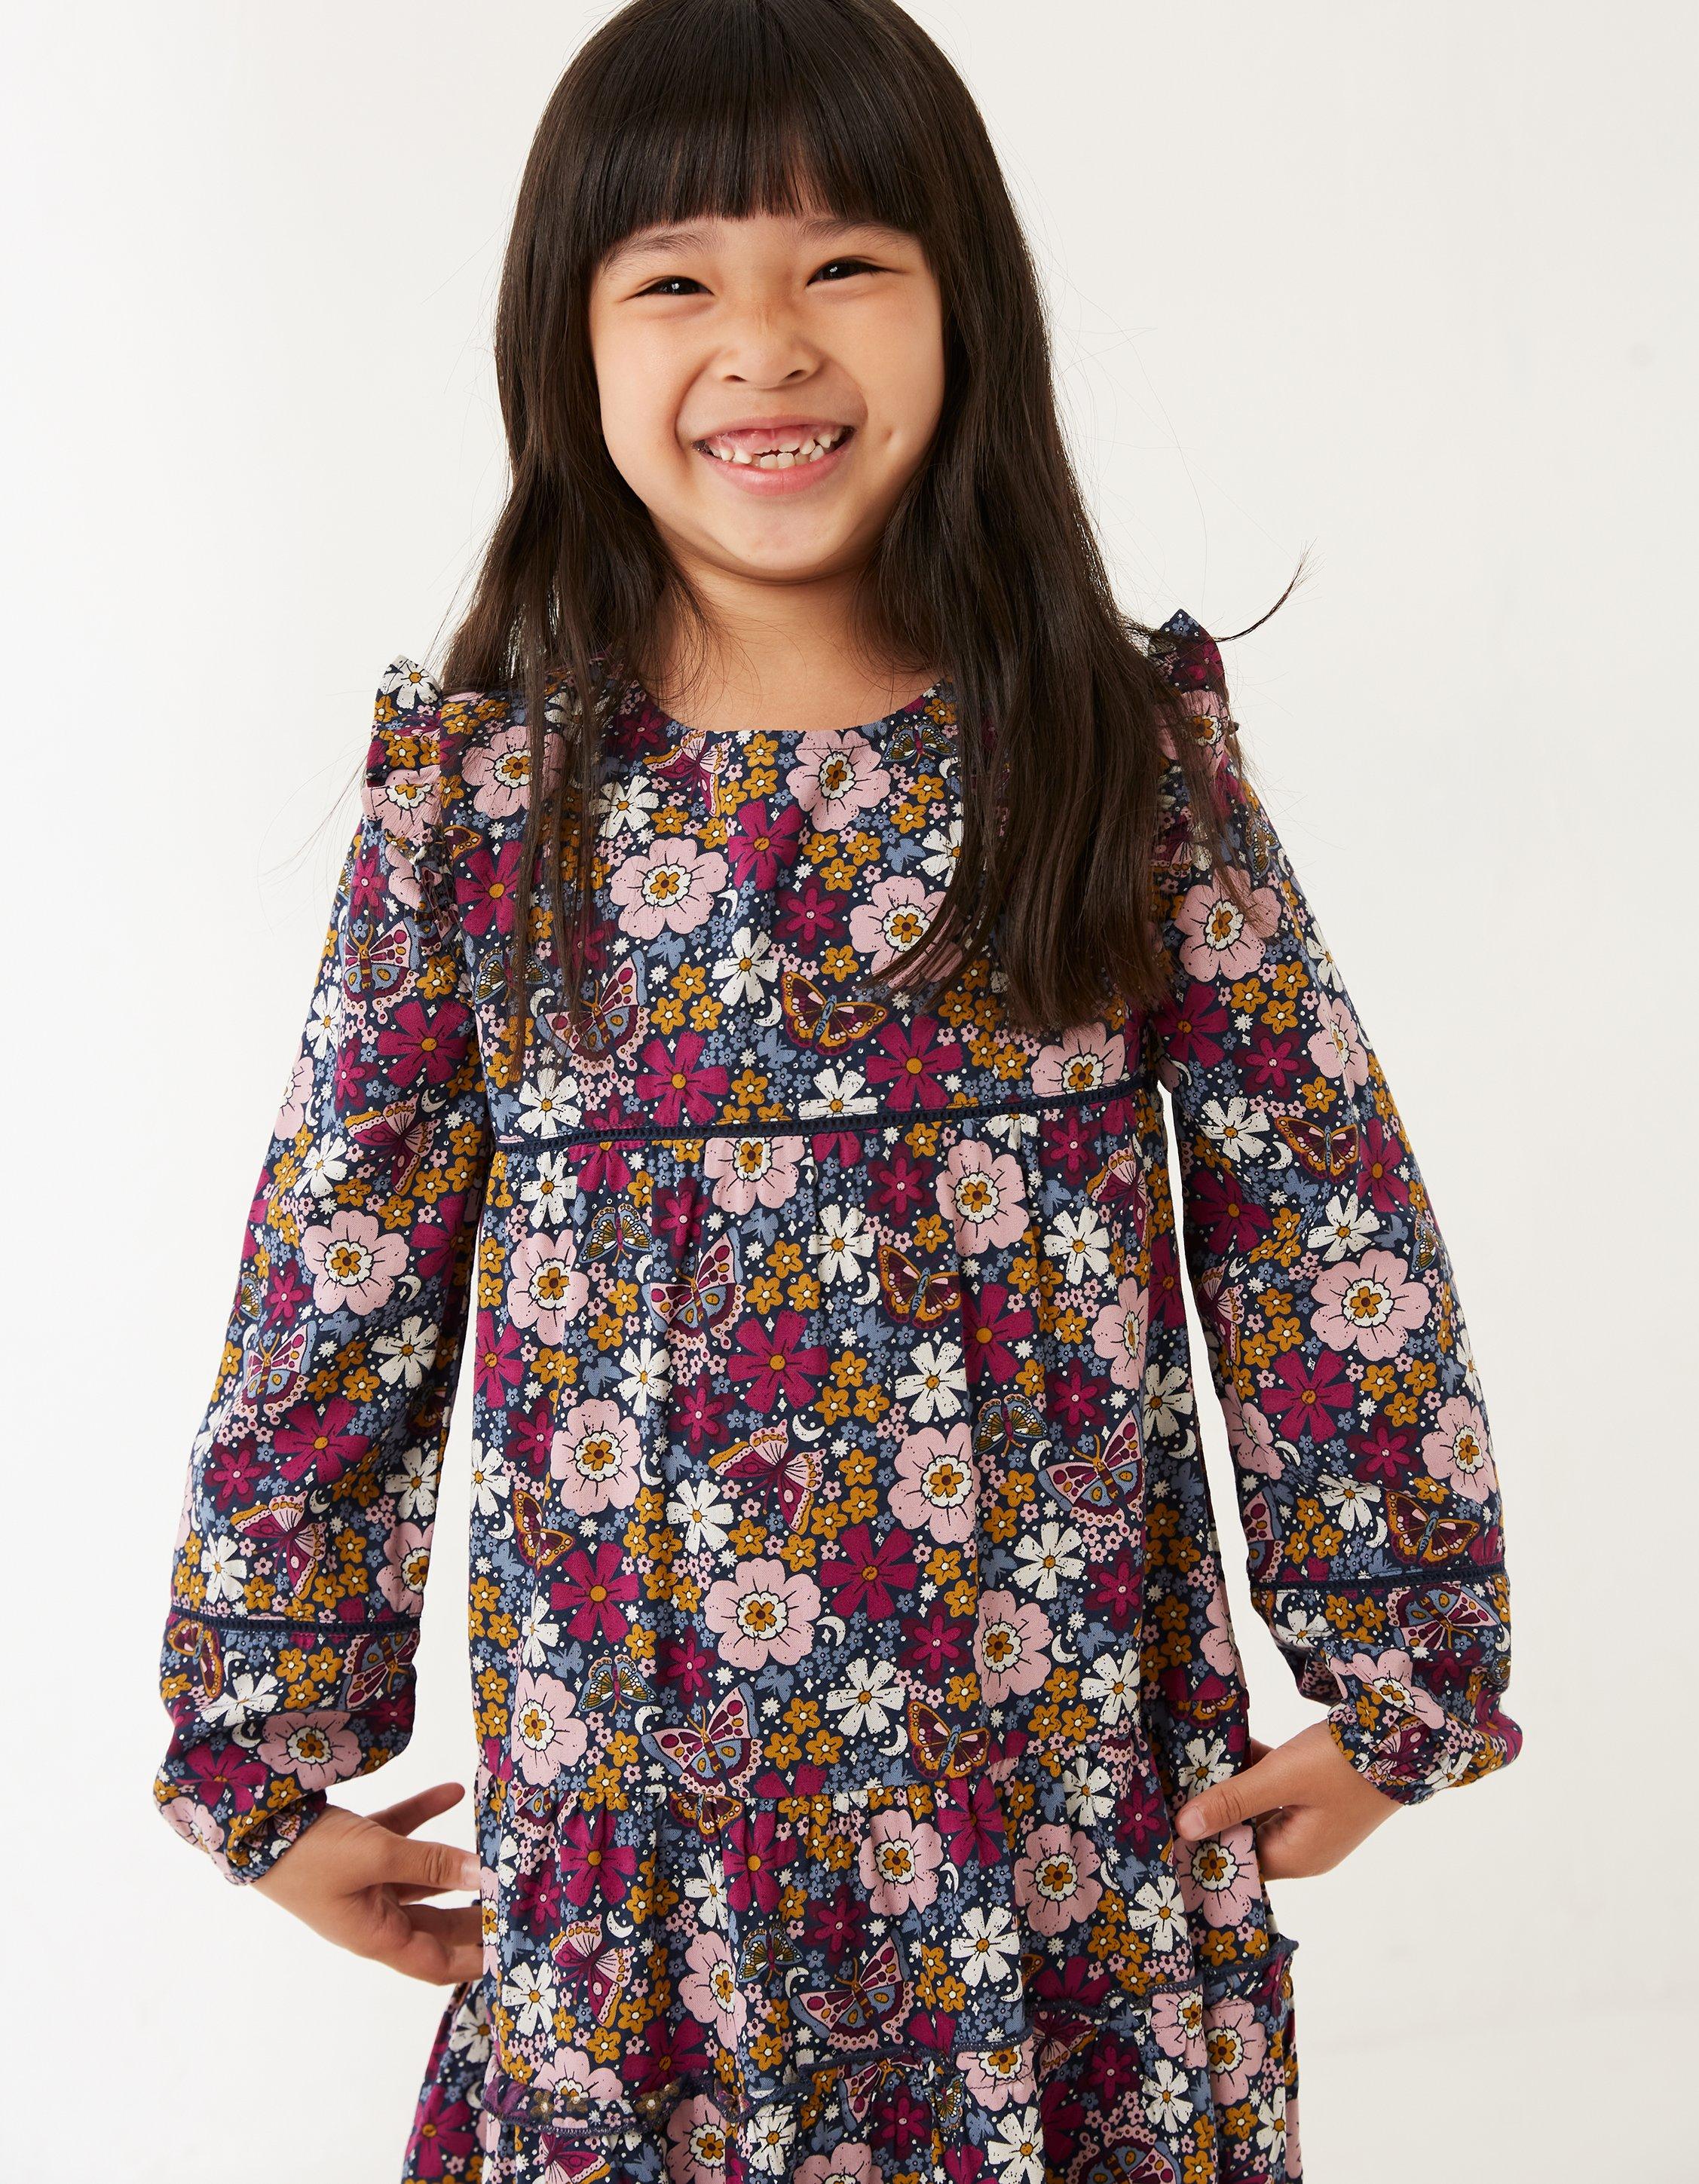 Kids' Clothing, Footwear & Accessories - FatFace US